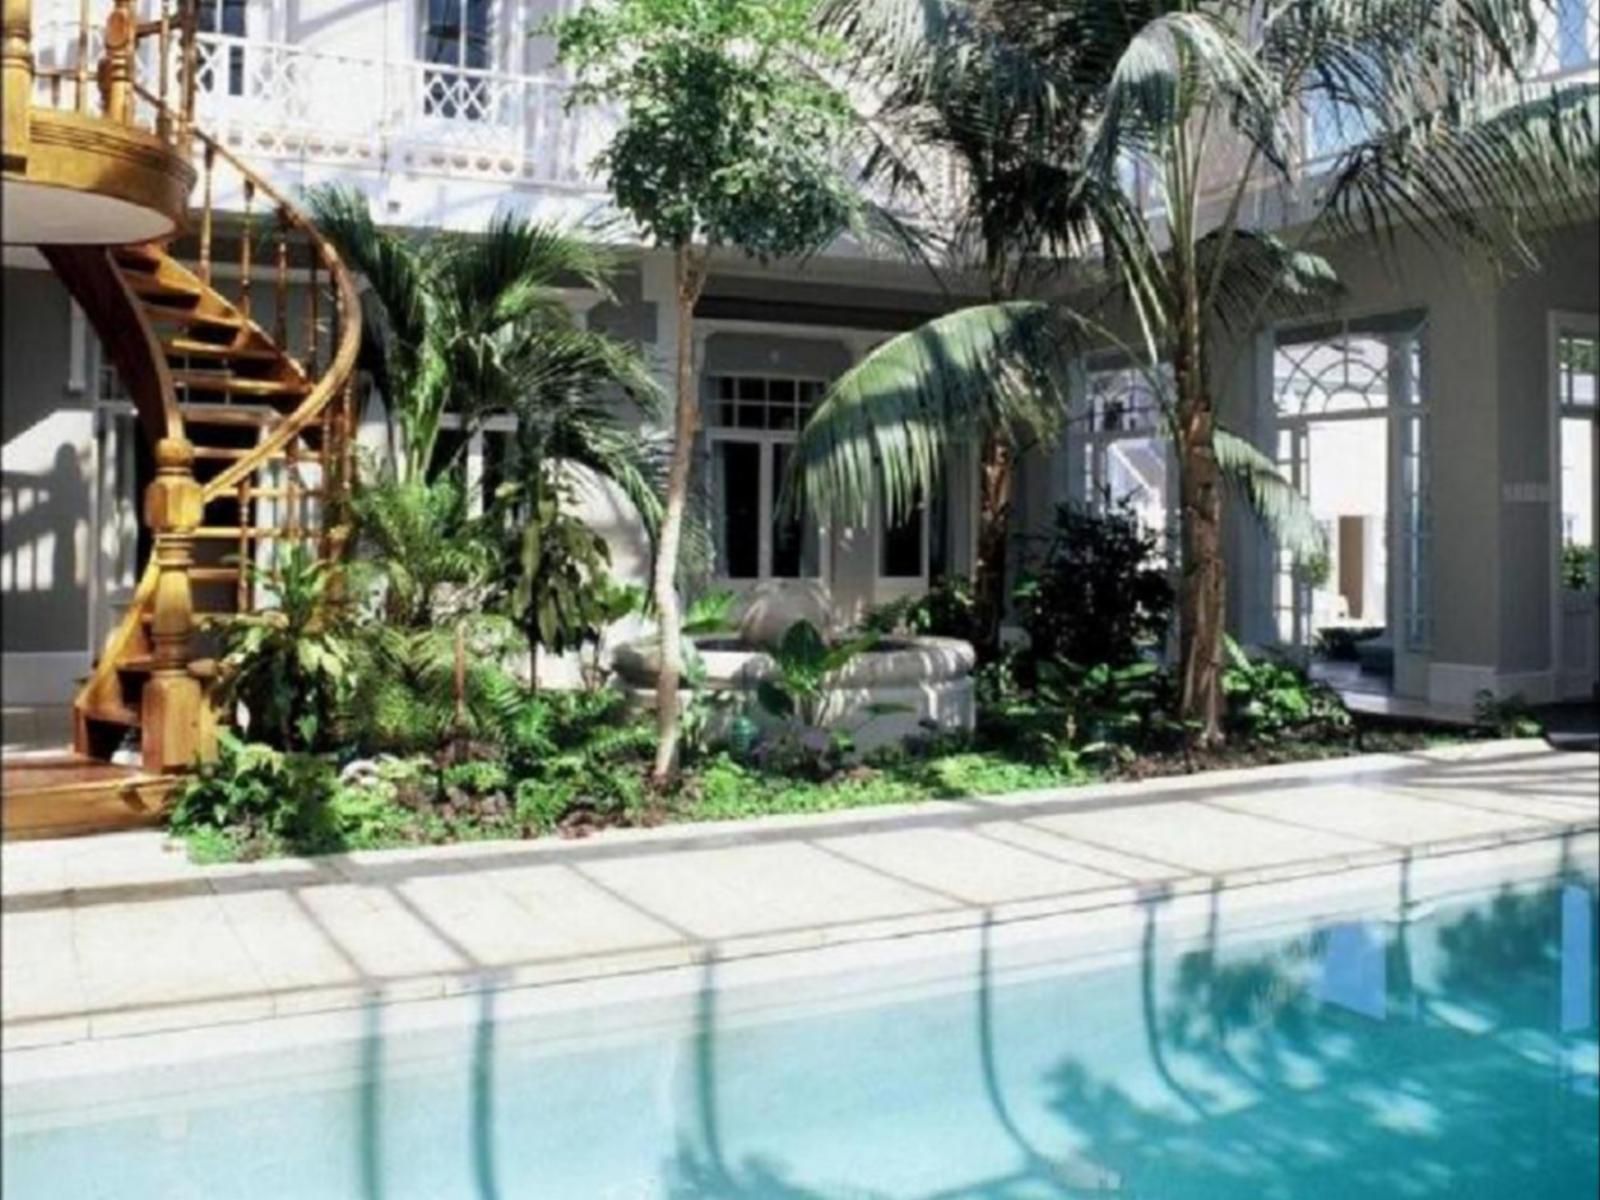 Banksia Boutique Rosebank Ct Cape Town Western Cape South Africa House, Building, Architecture, Palm Tree, Plant, Nature, Wood, Garden, Swimming Pool